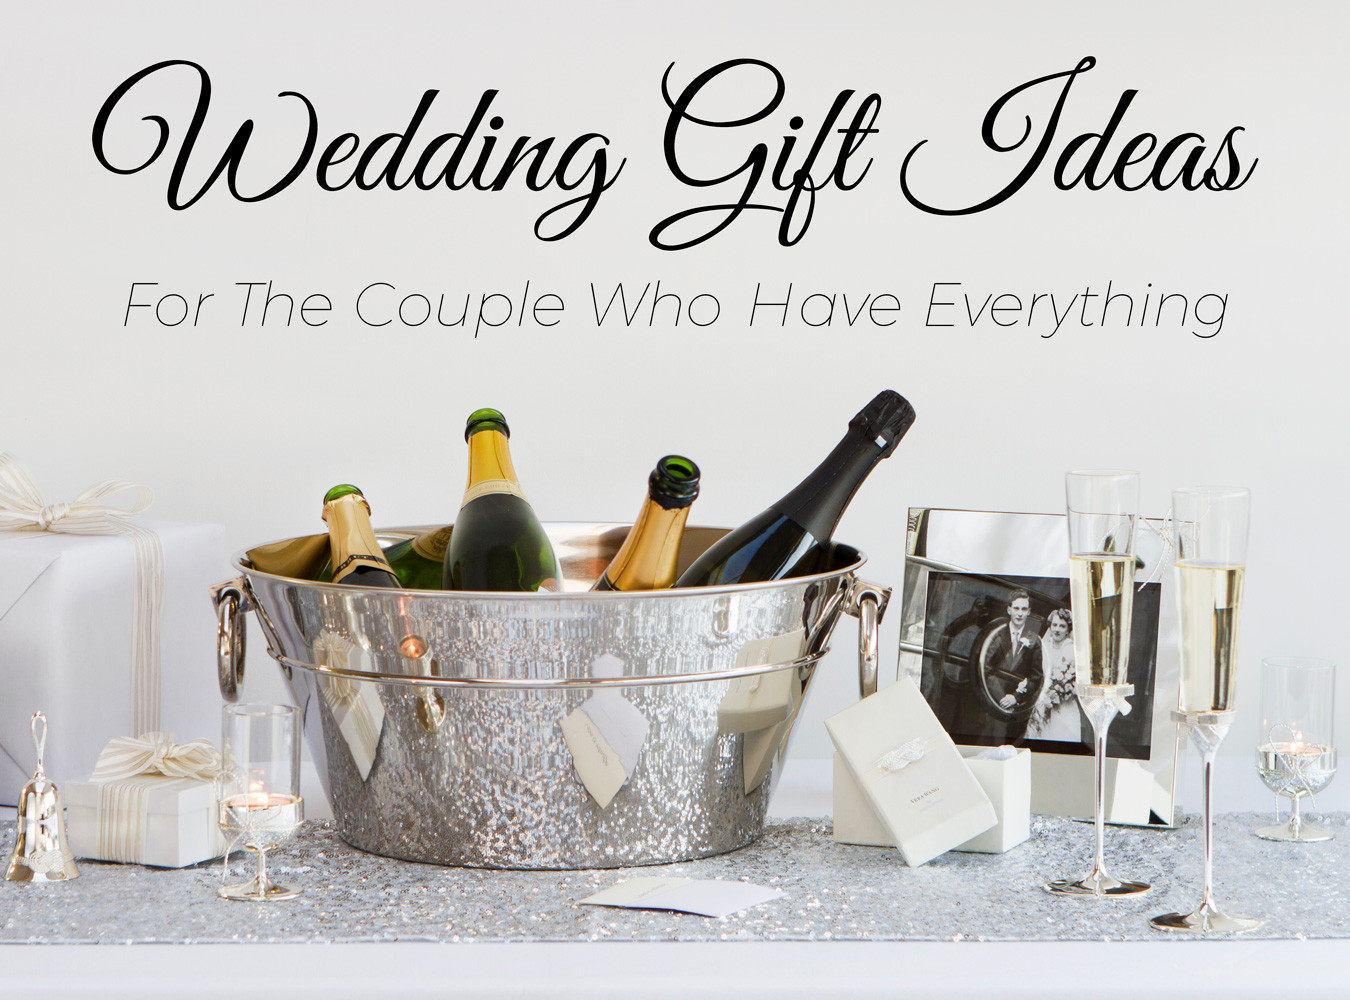 Engagement Gift Ideas For Young Couples
 5 Wedding Gift Ideas for the Couple Who Have Everything